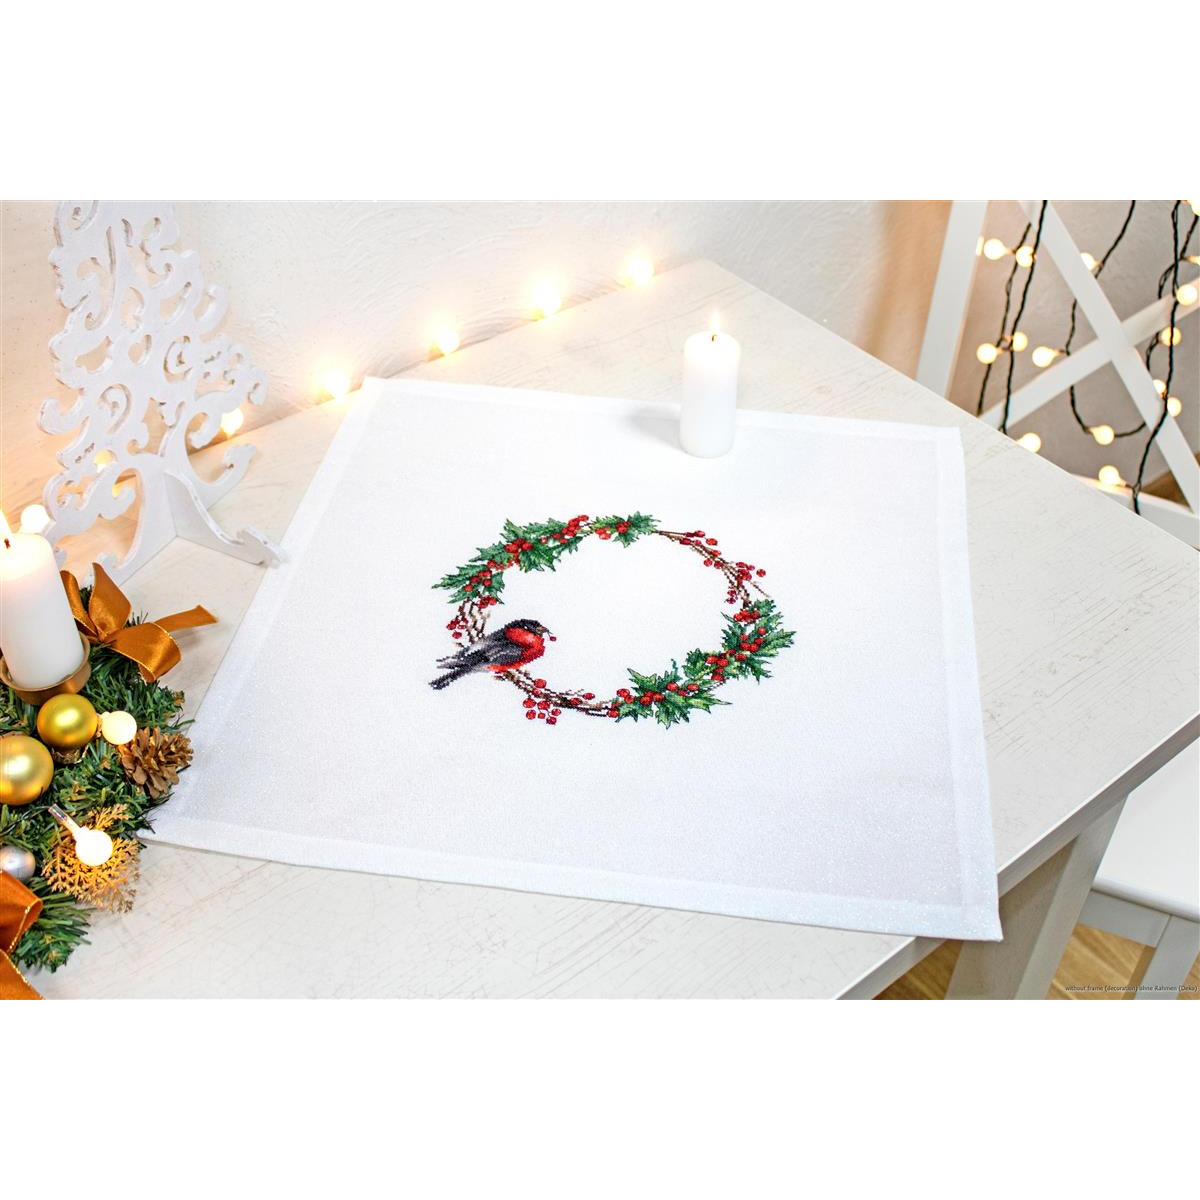 A white placemat from a Luca-s embroidery pack shows an...